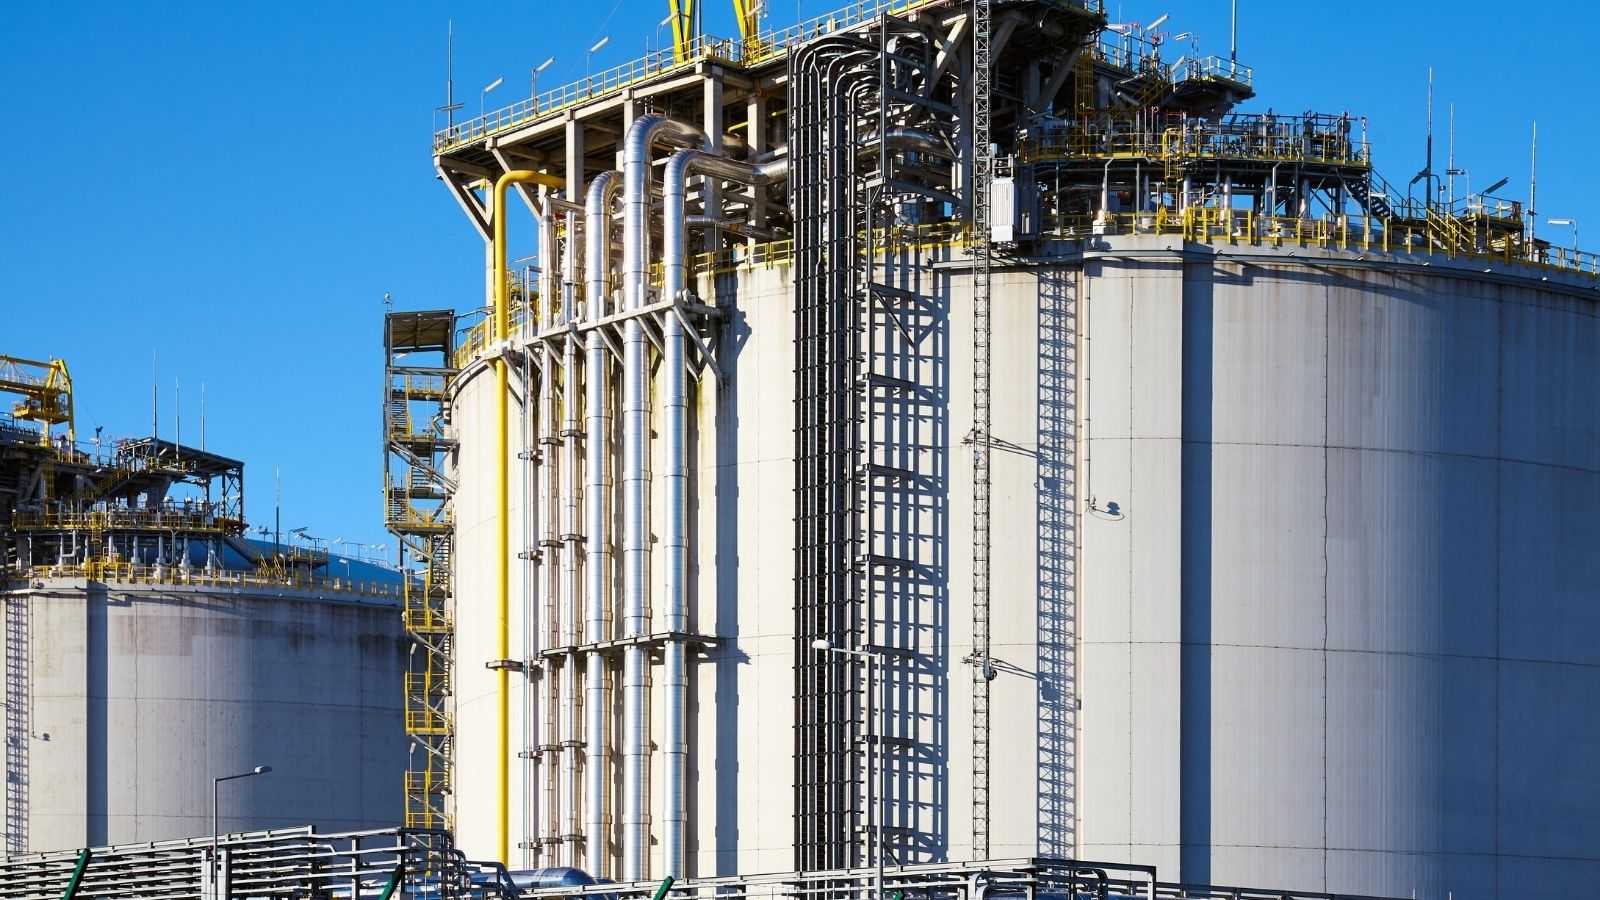 LNG – a ‘natural’ solution to the world’s energy needs